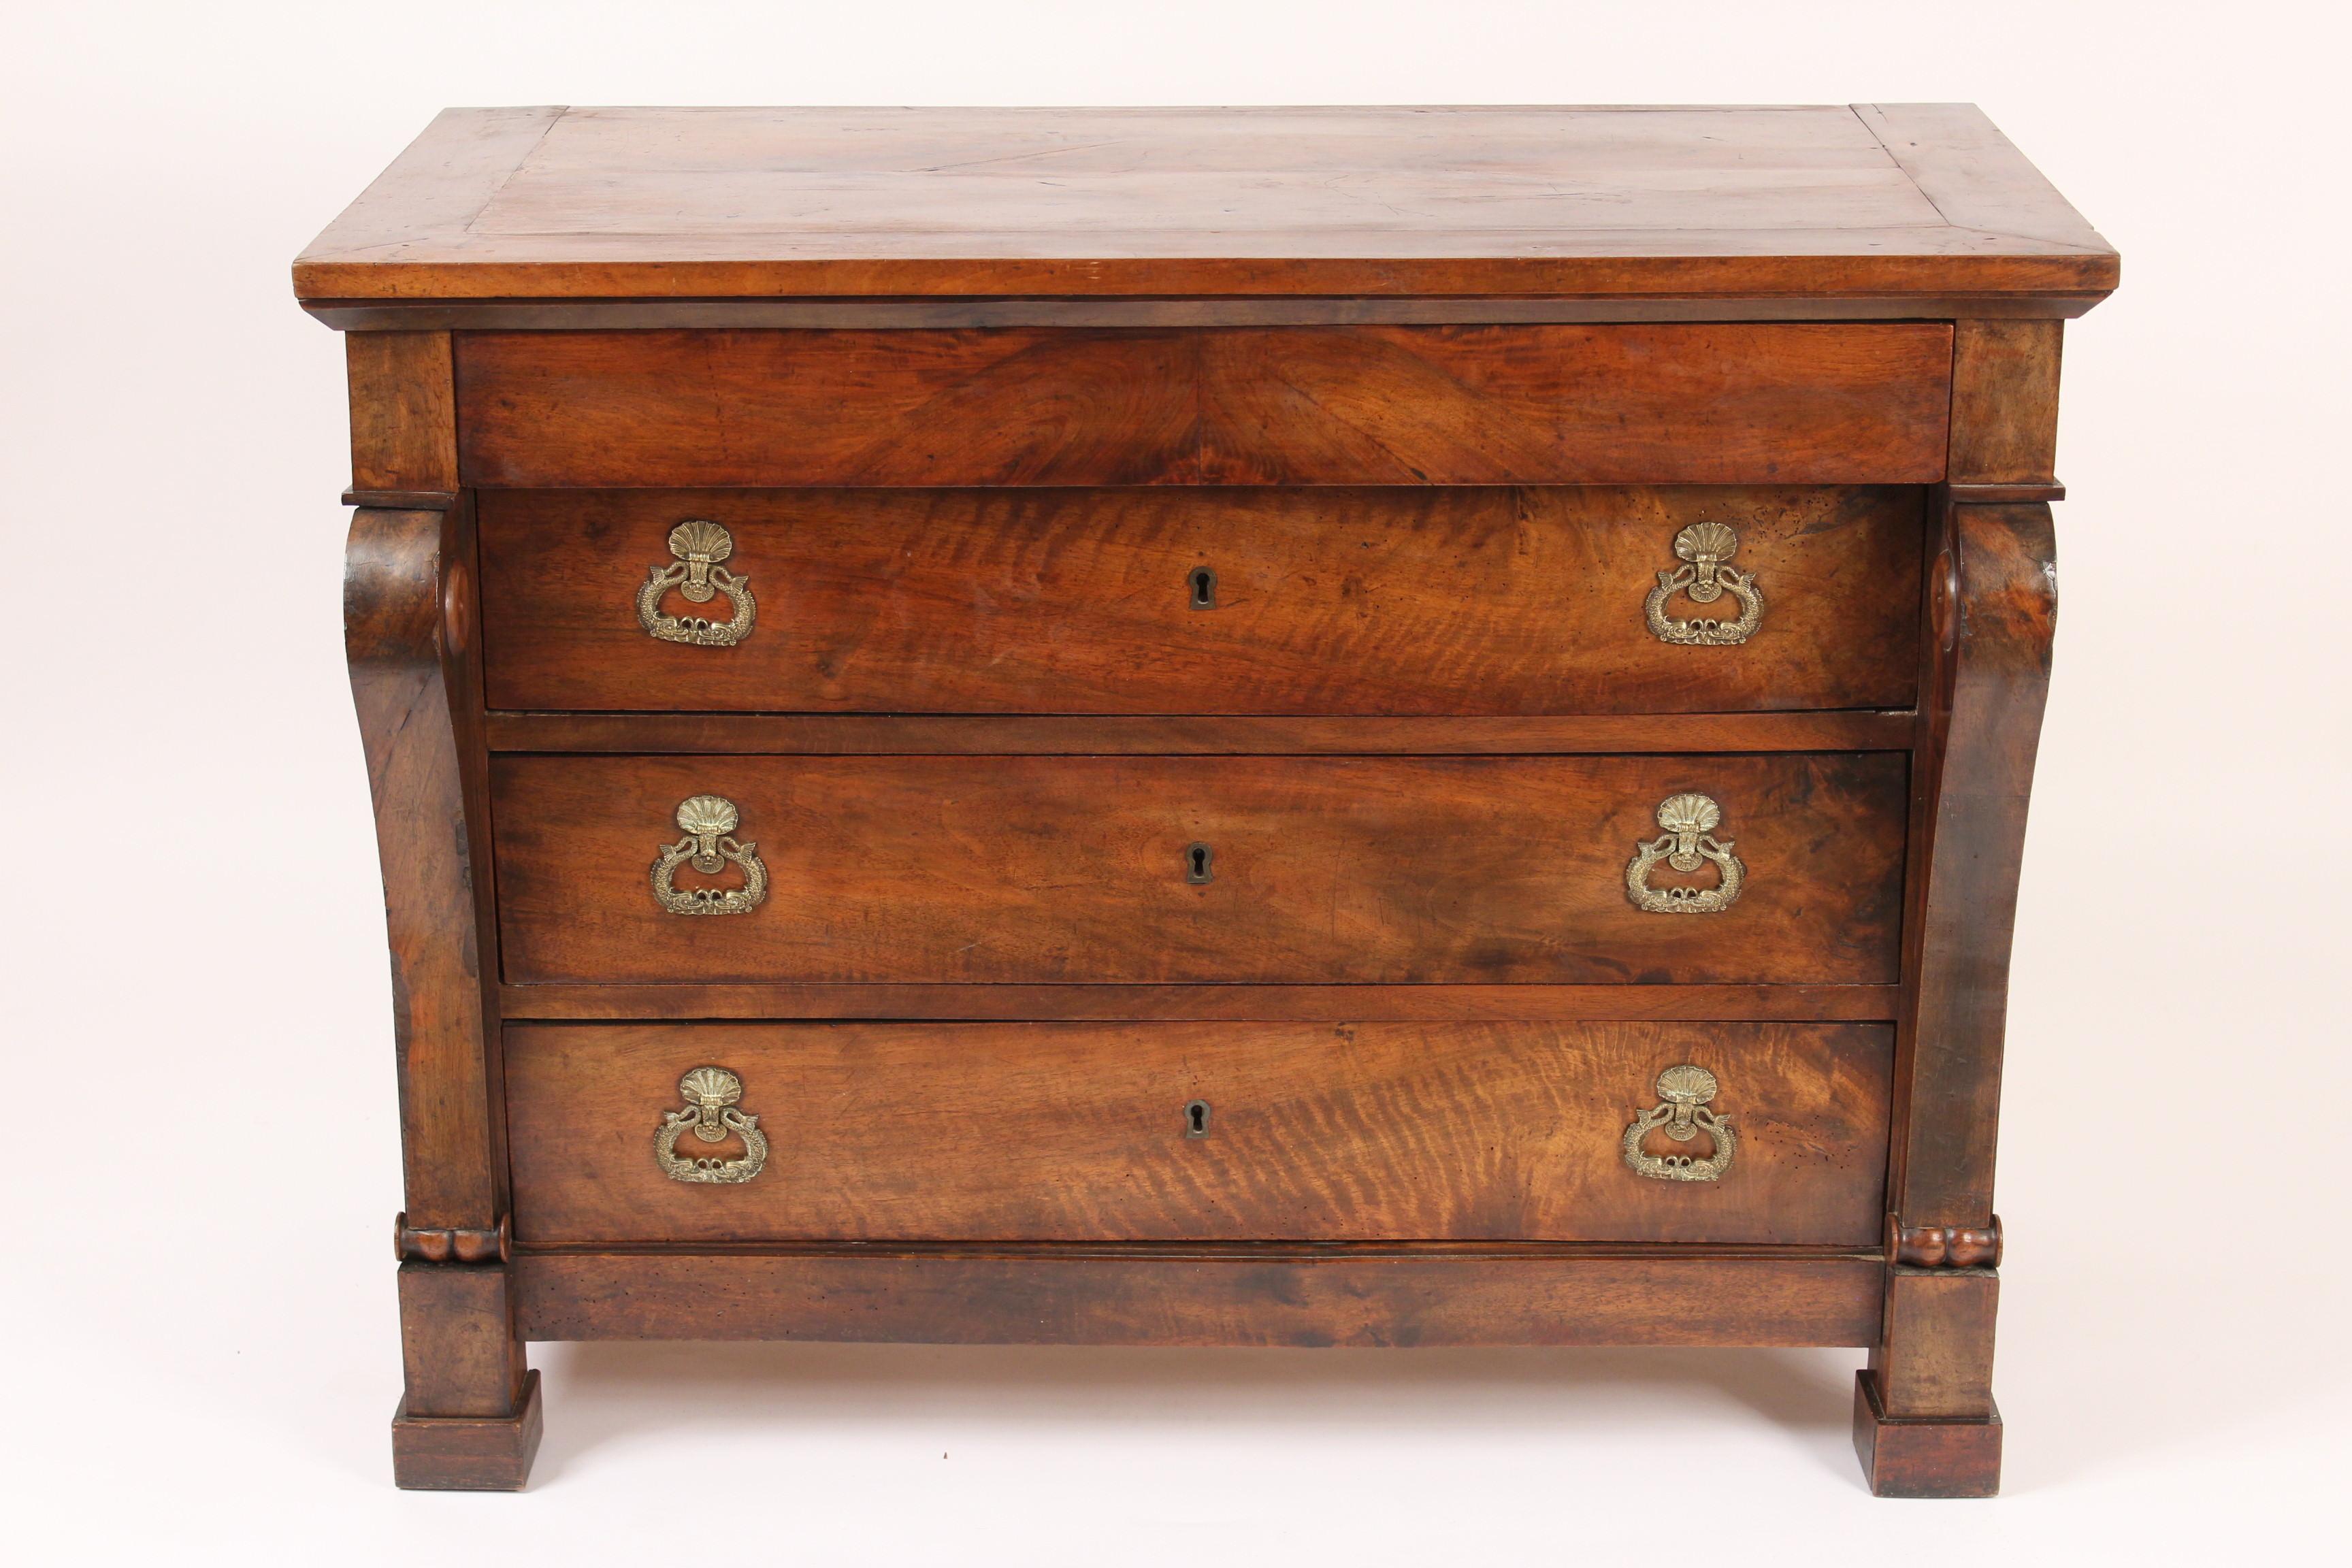 Antique Restauration style walnut chest of drawers, 19th century. Excellent old patina, fine quality pulls and hand dove tailed drawer construction.